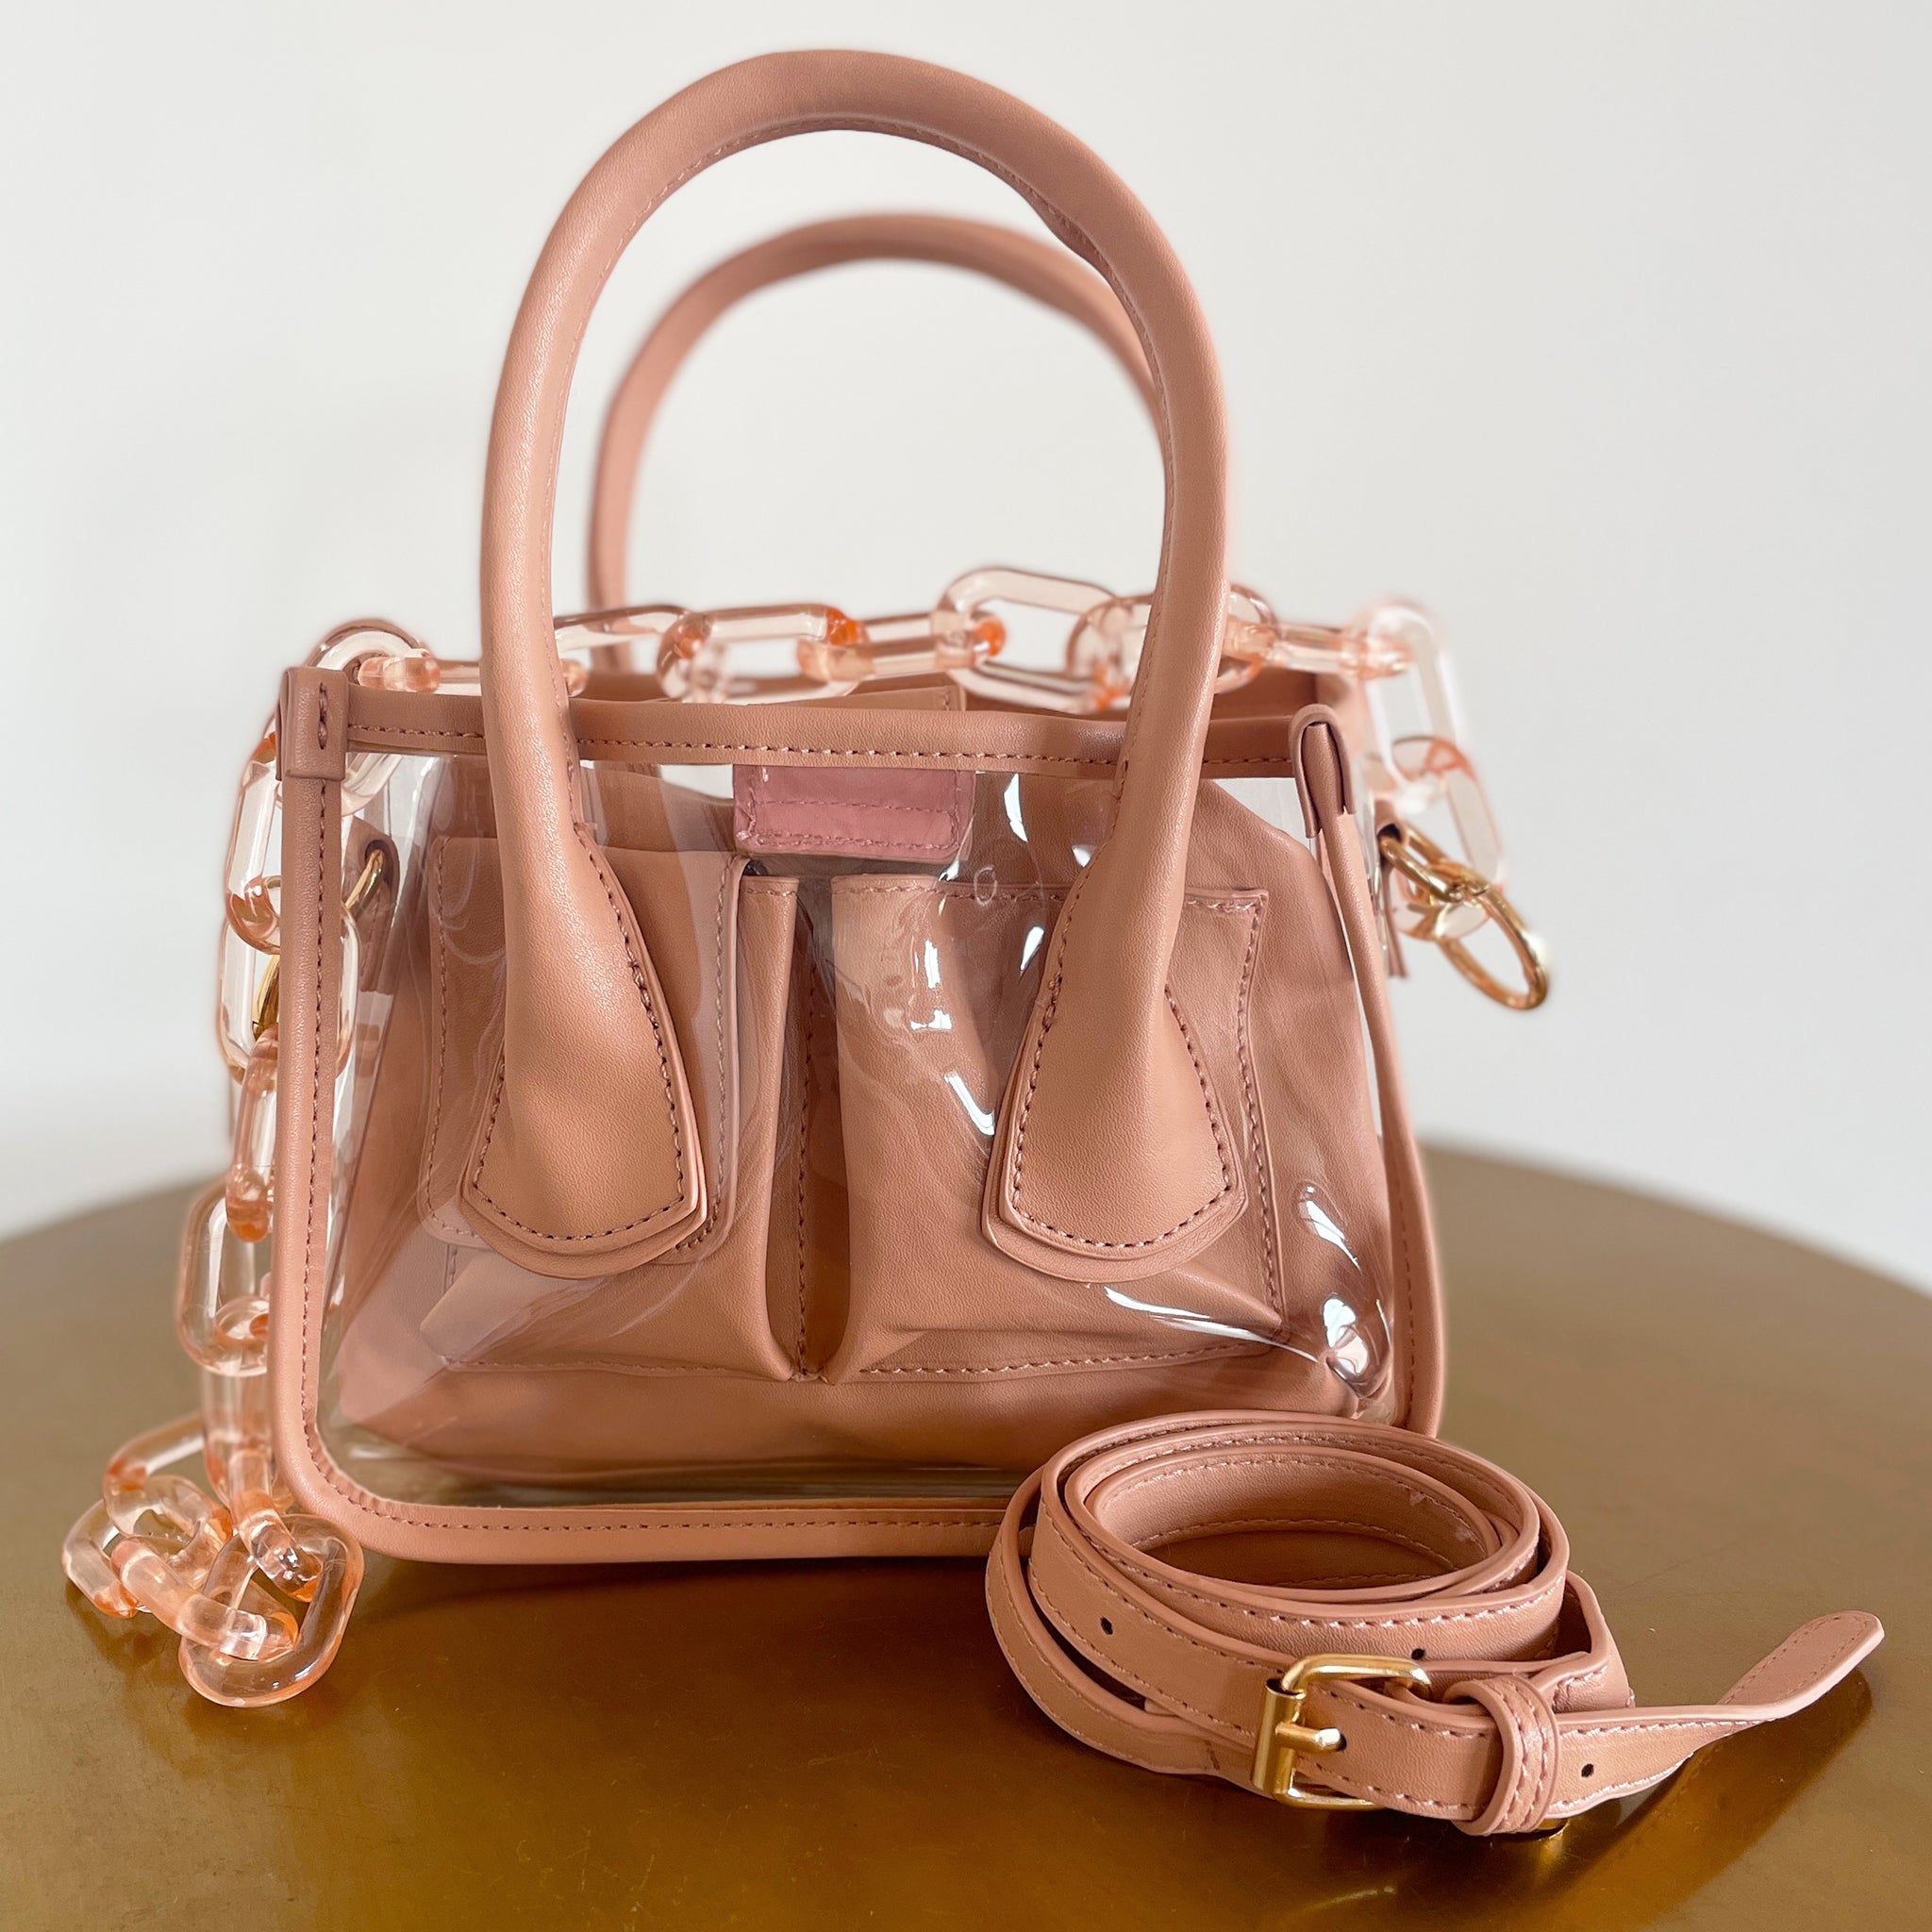 The Molly by Clearly Handbags